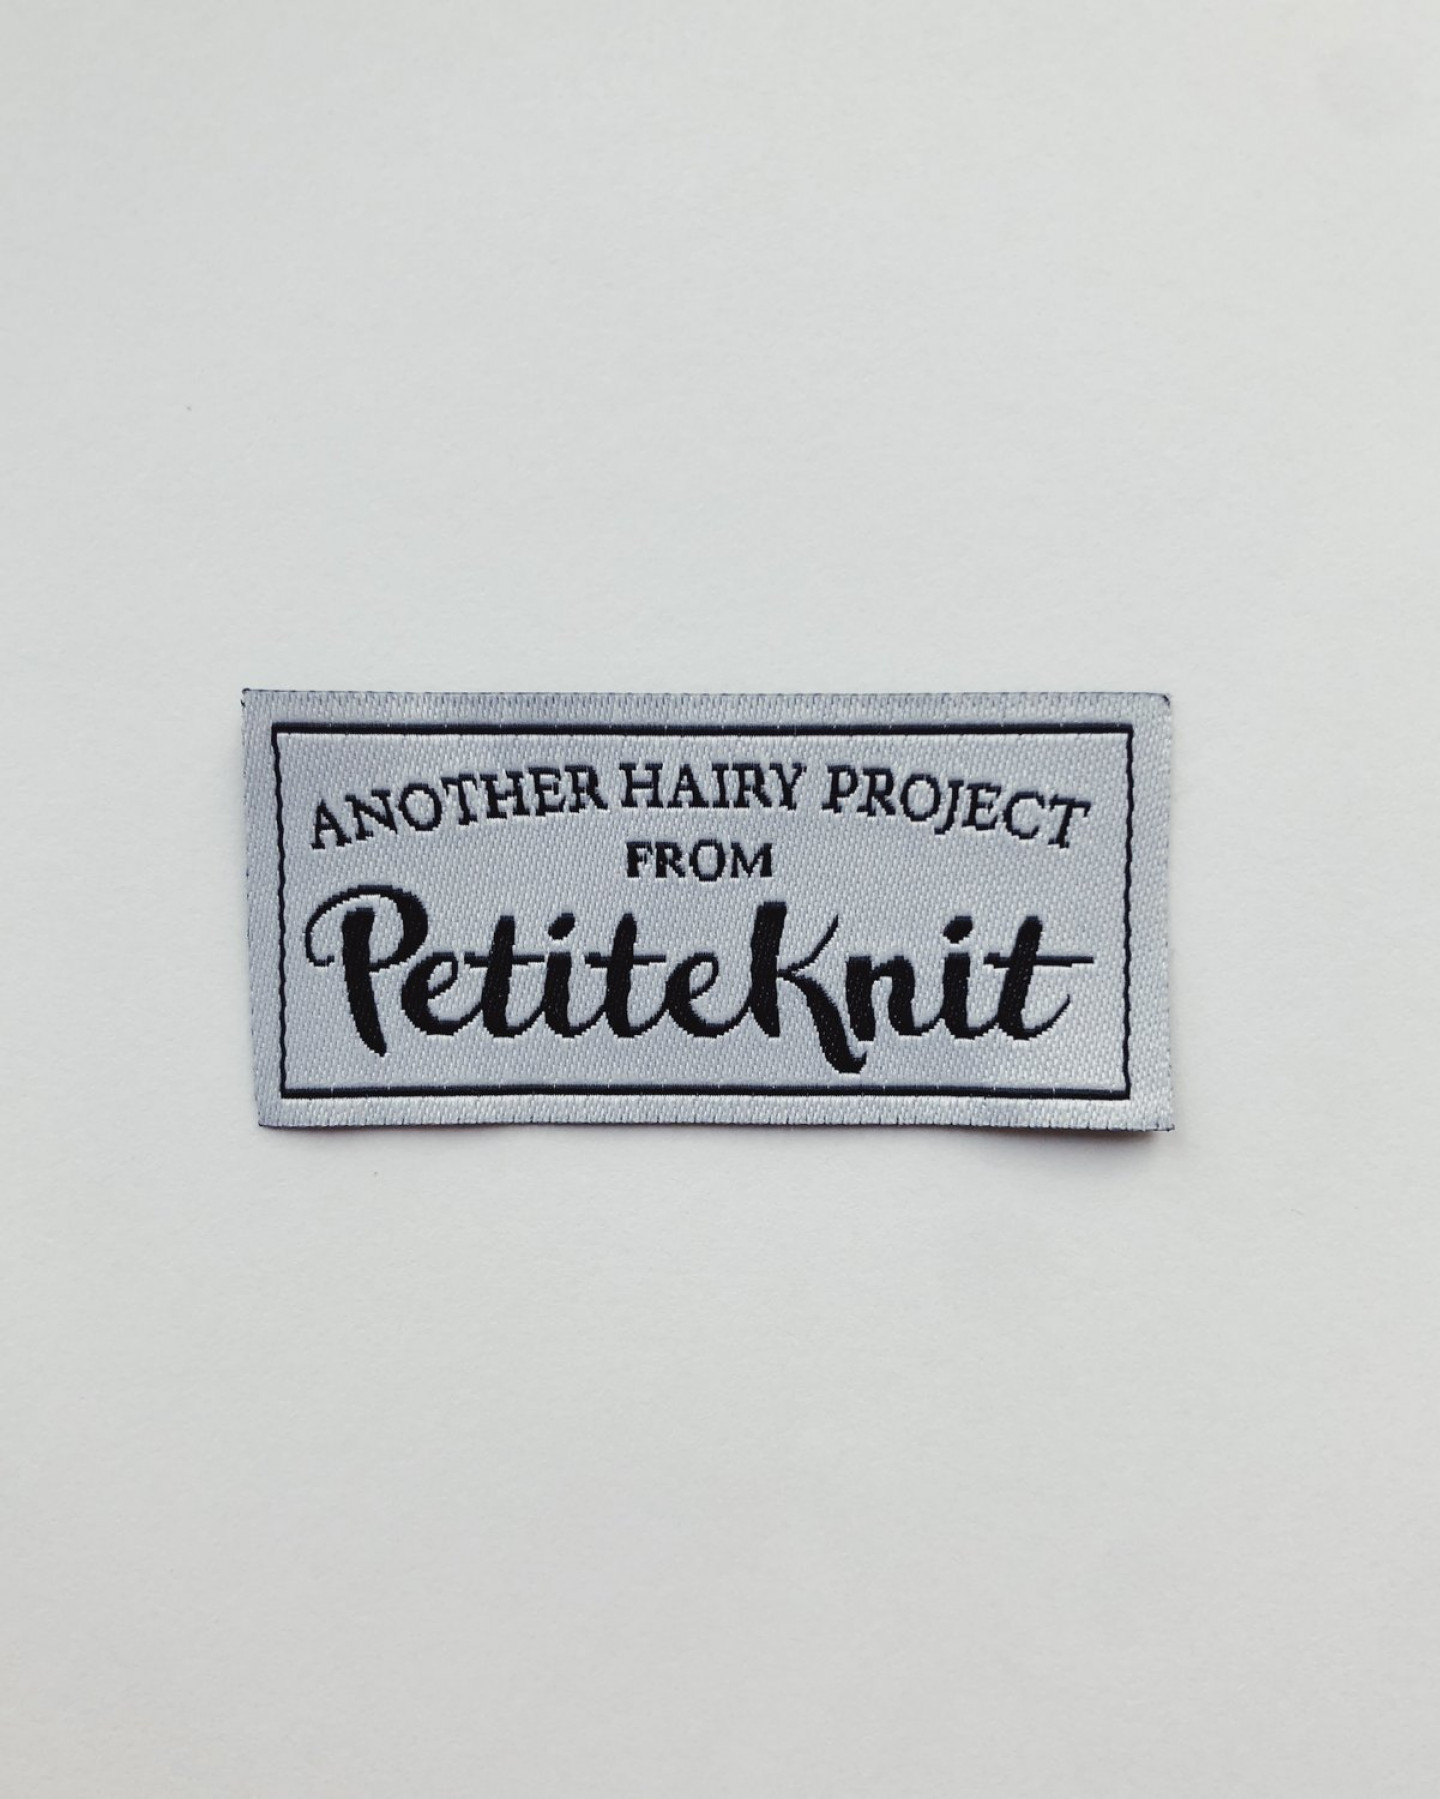 "Another Hairy Project From PetiteKnit" by PetiteKnit -label